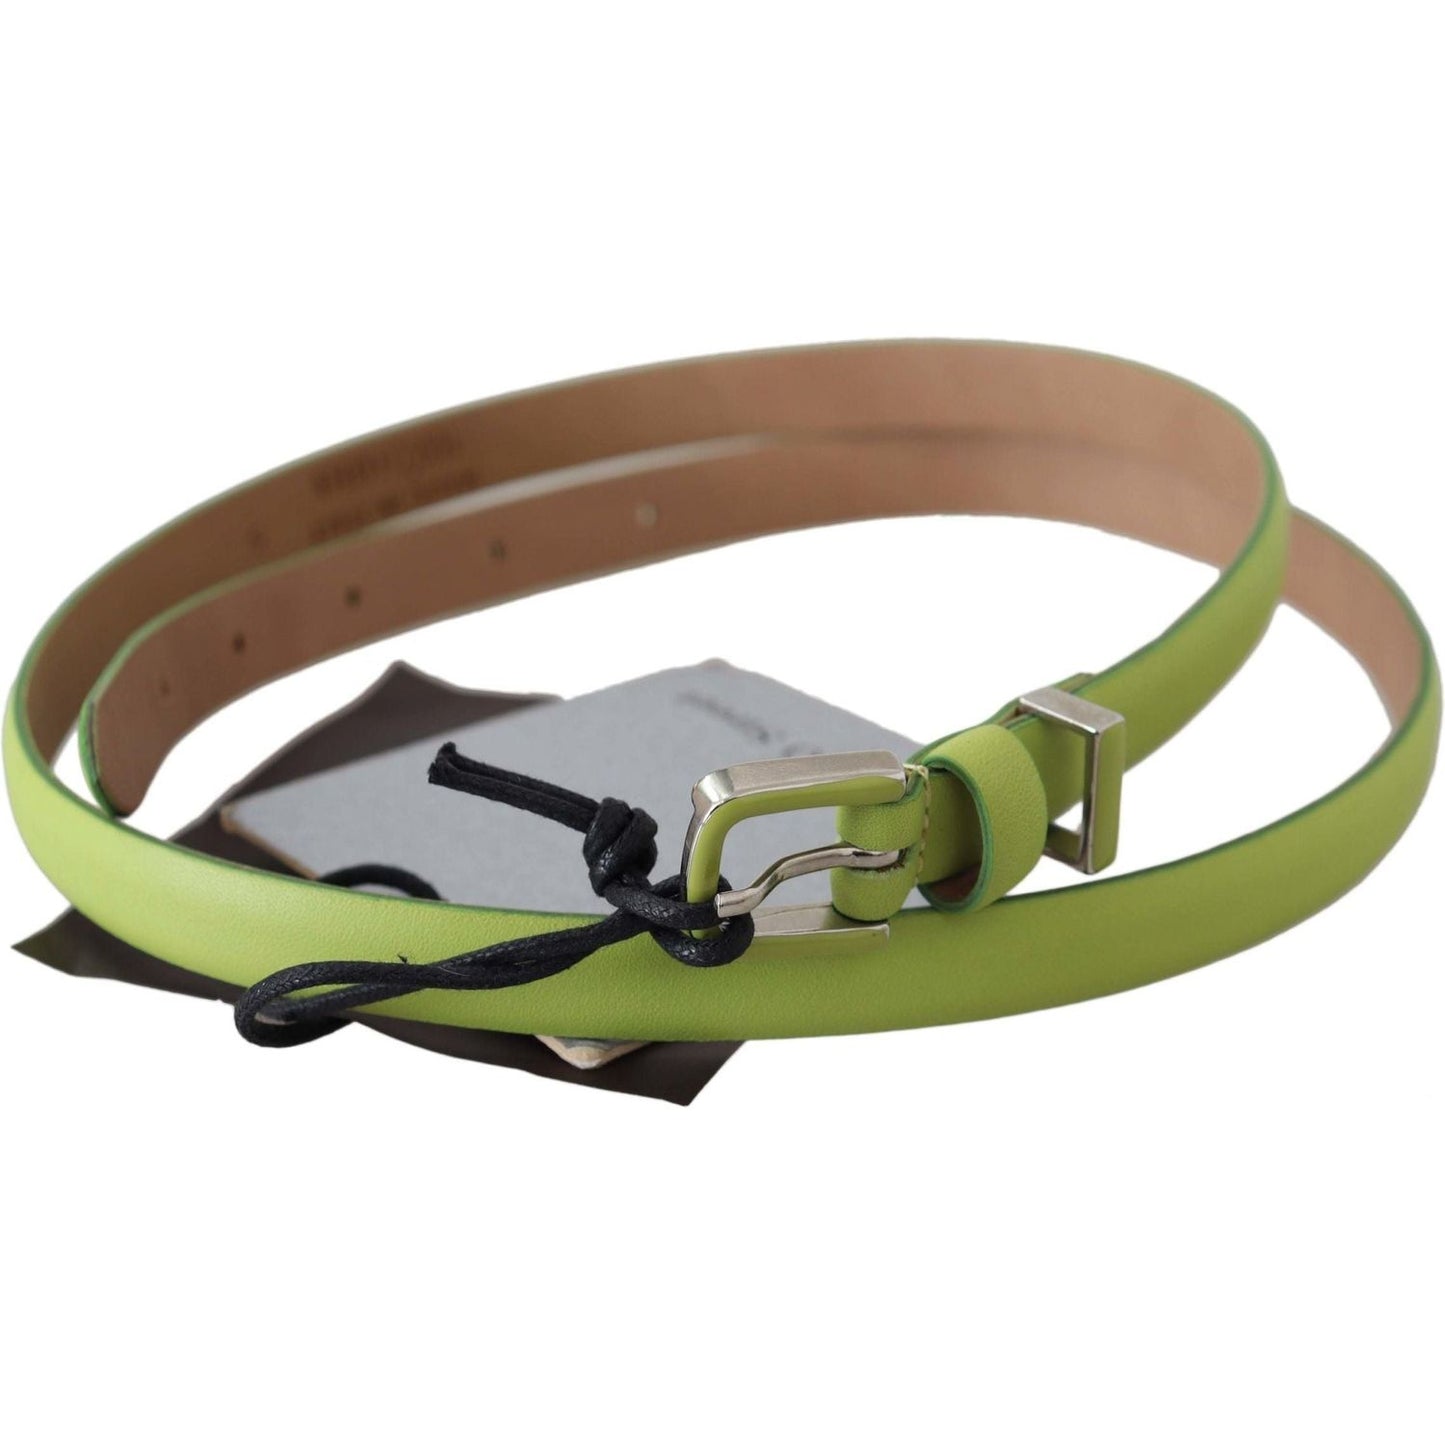 Scervino Street Classic Green Leather Belt with Silver-Tone Hardware Belt green-leather-chartreuse-silver-green-buckle-belt IMG_6303-scaled-31e656f0-42e.jpg